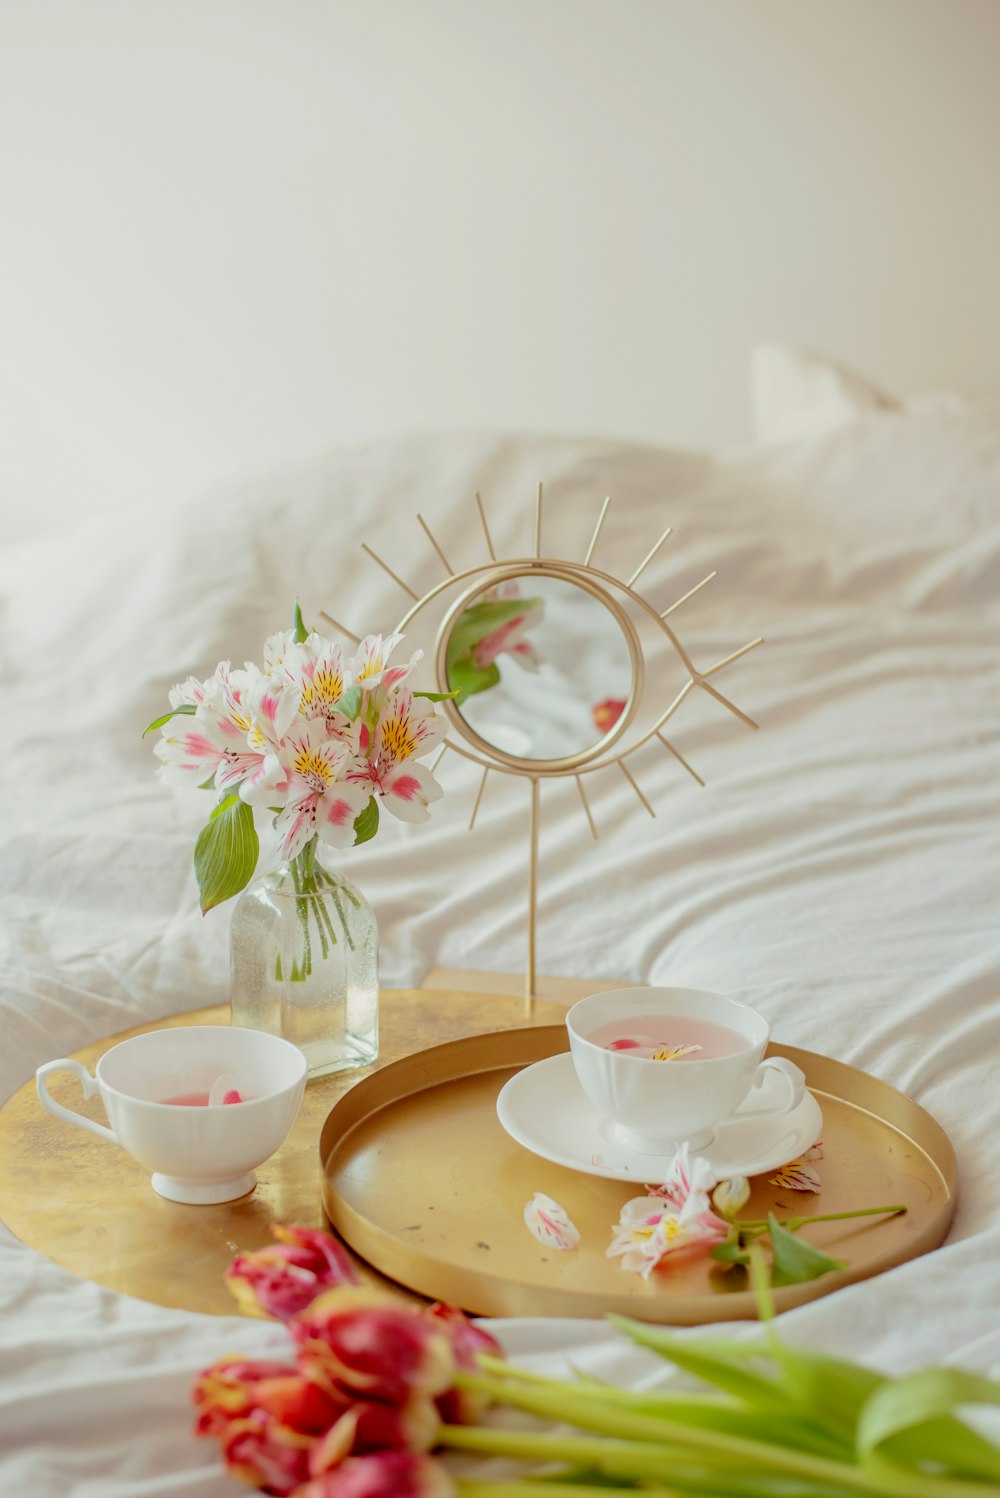 a tray with flowers and a mirror on a bed